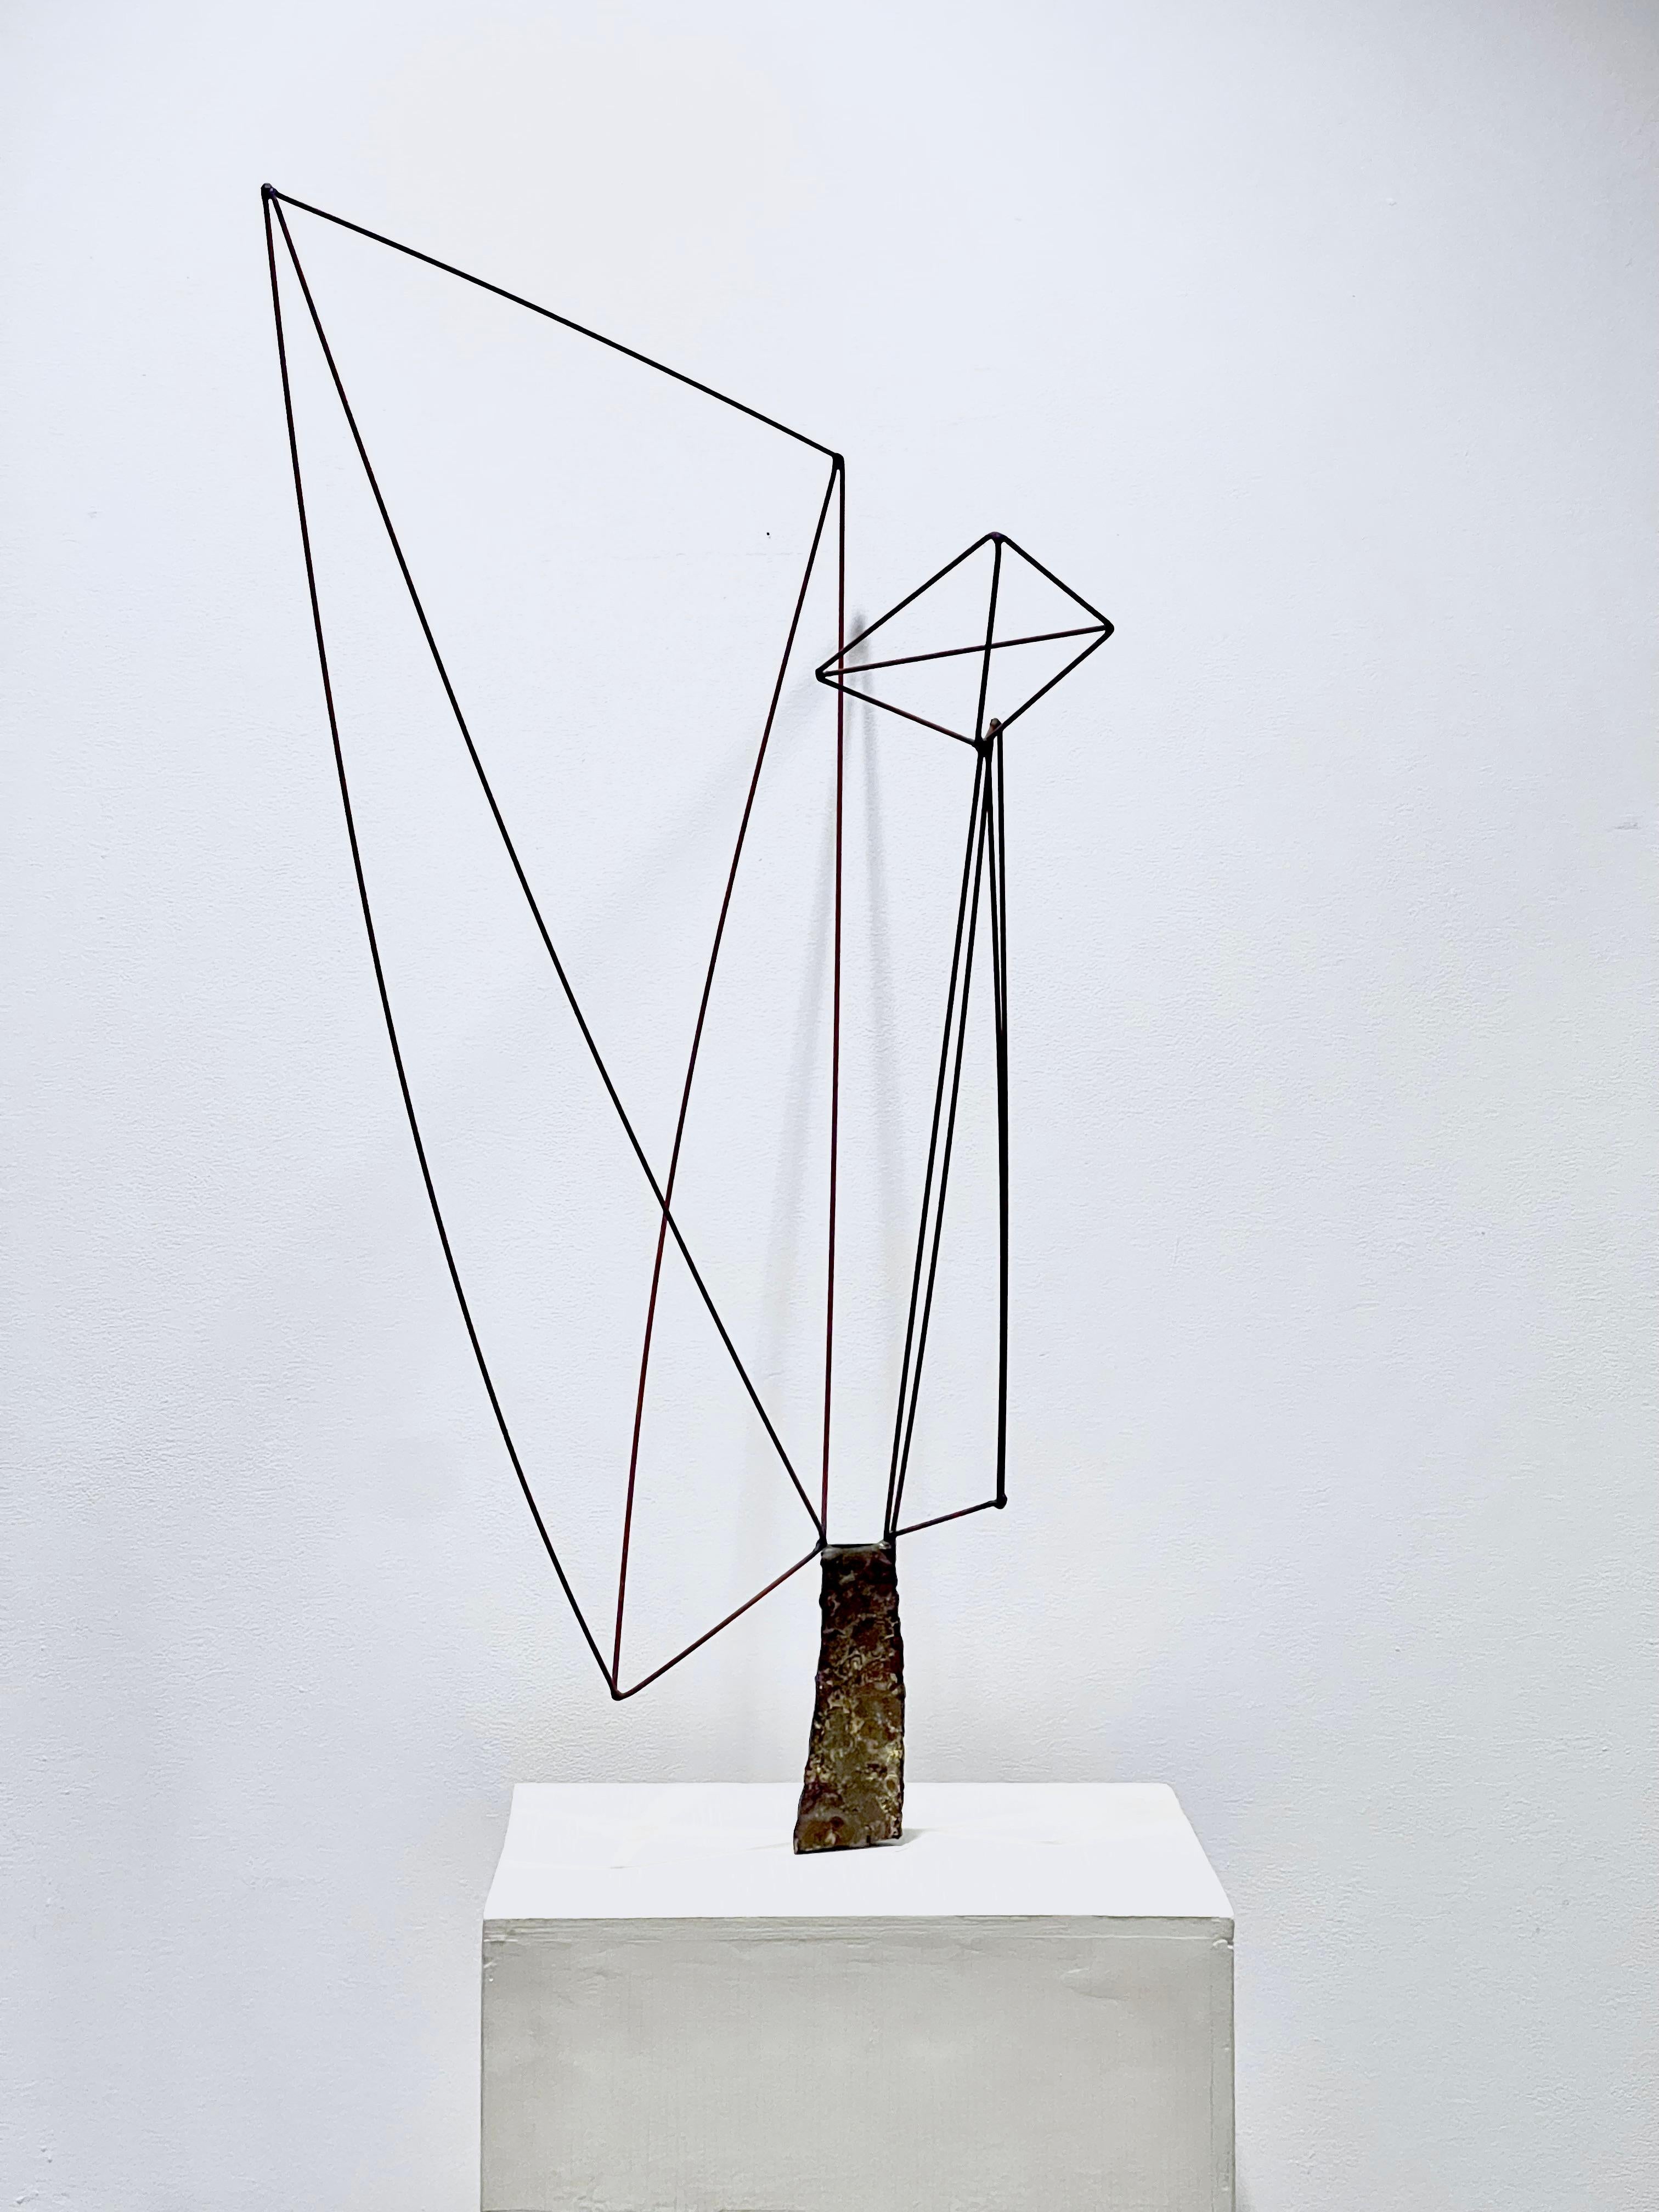 Wire sculpture on pedestal by Harry Bertoia (1915-1978), circa 1950's.
Overall dimensions including pedstal: 79.5